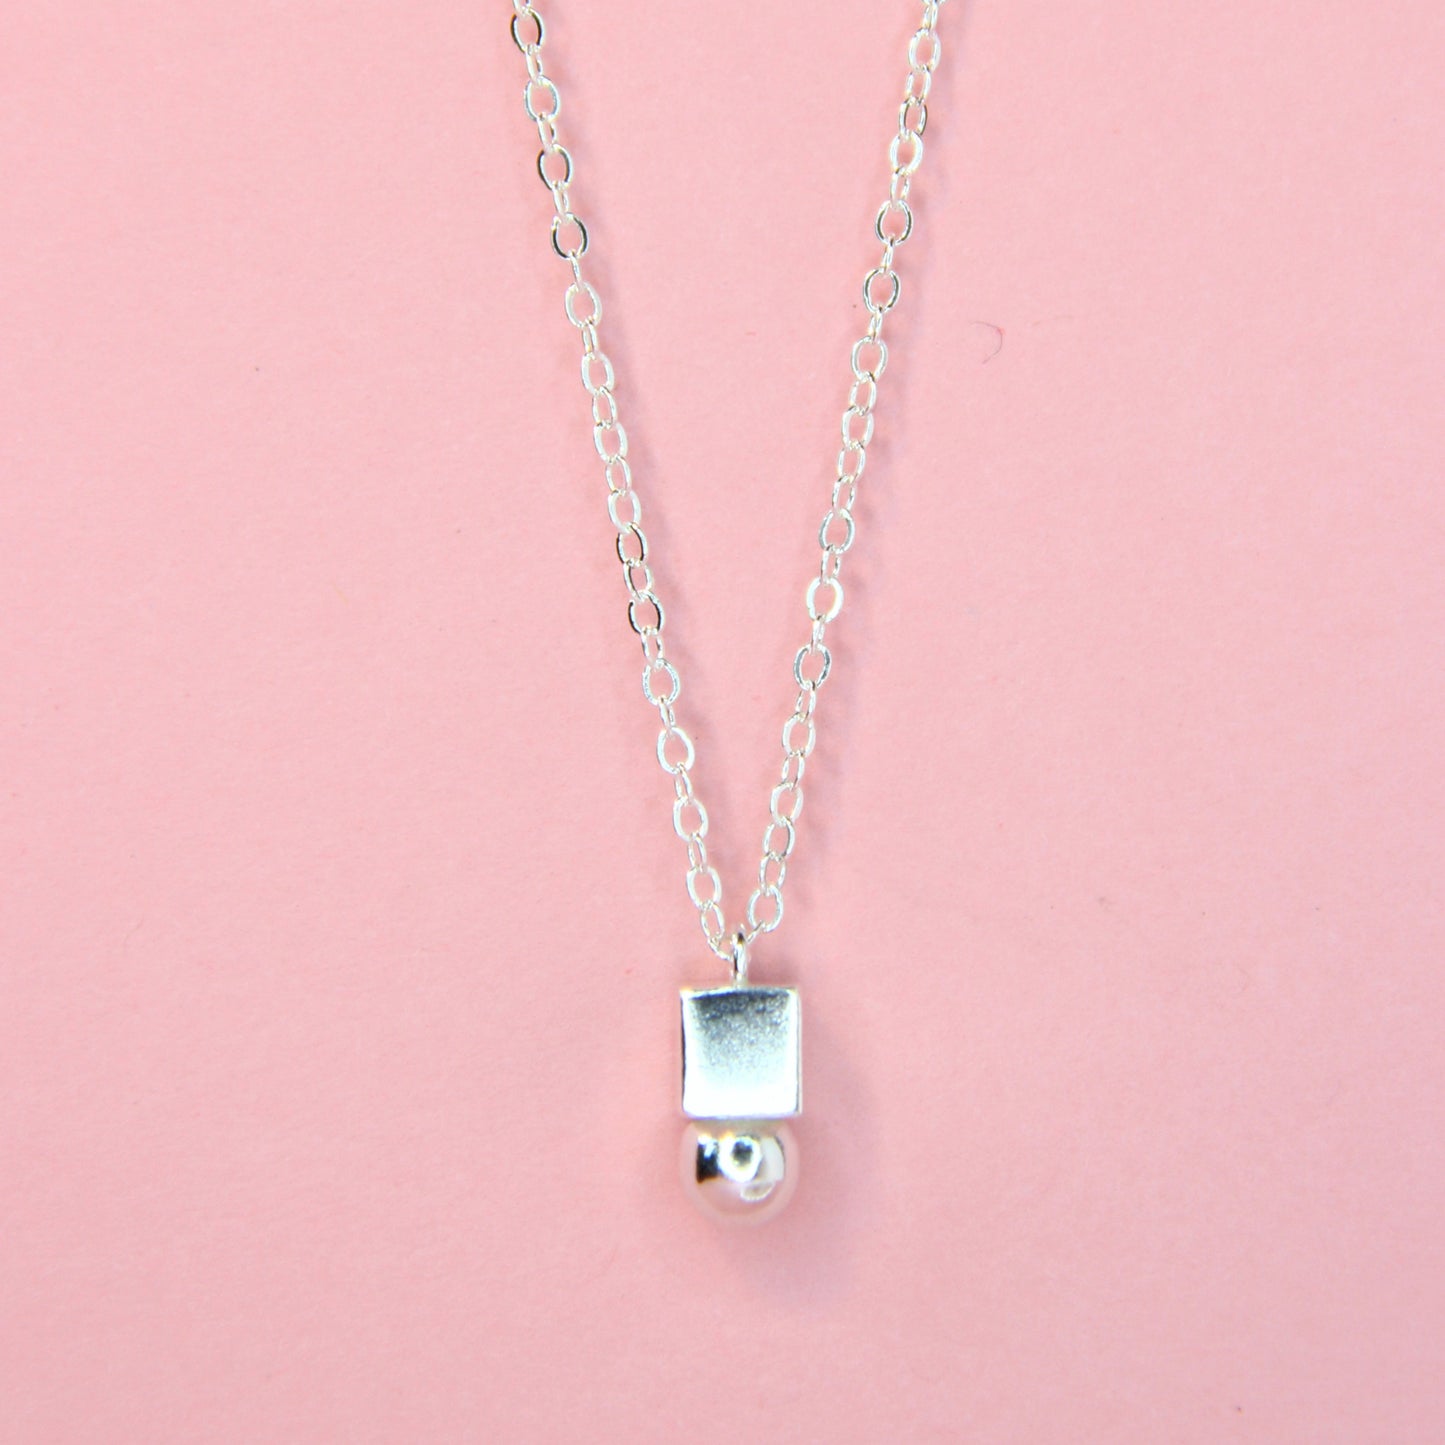 Shapes Charm Necklace